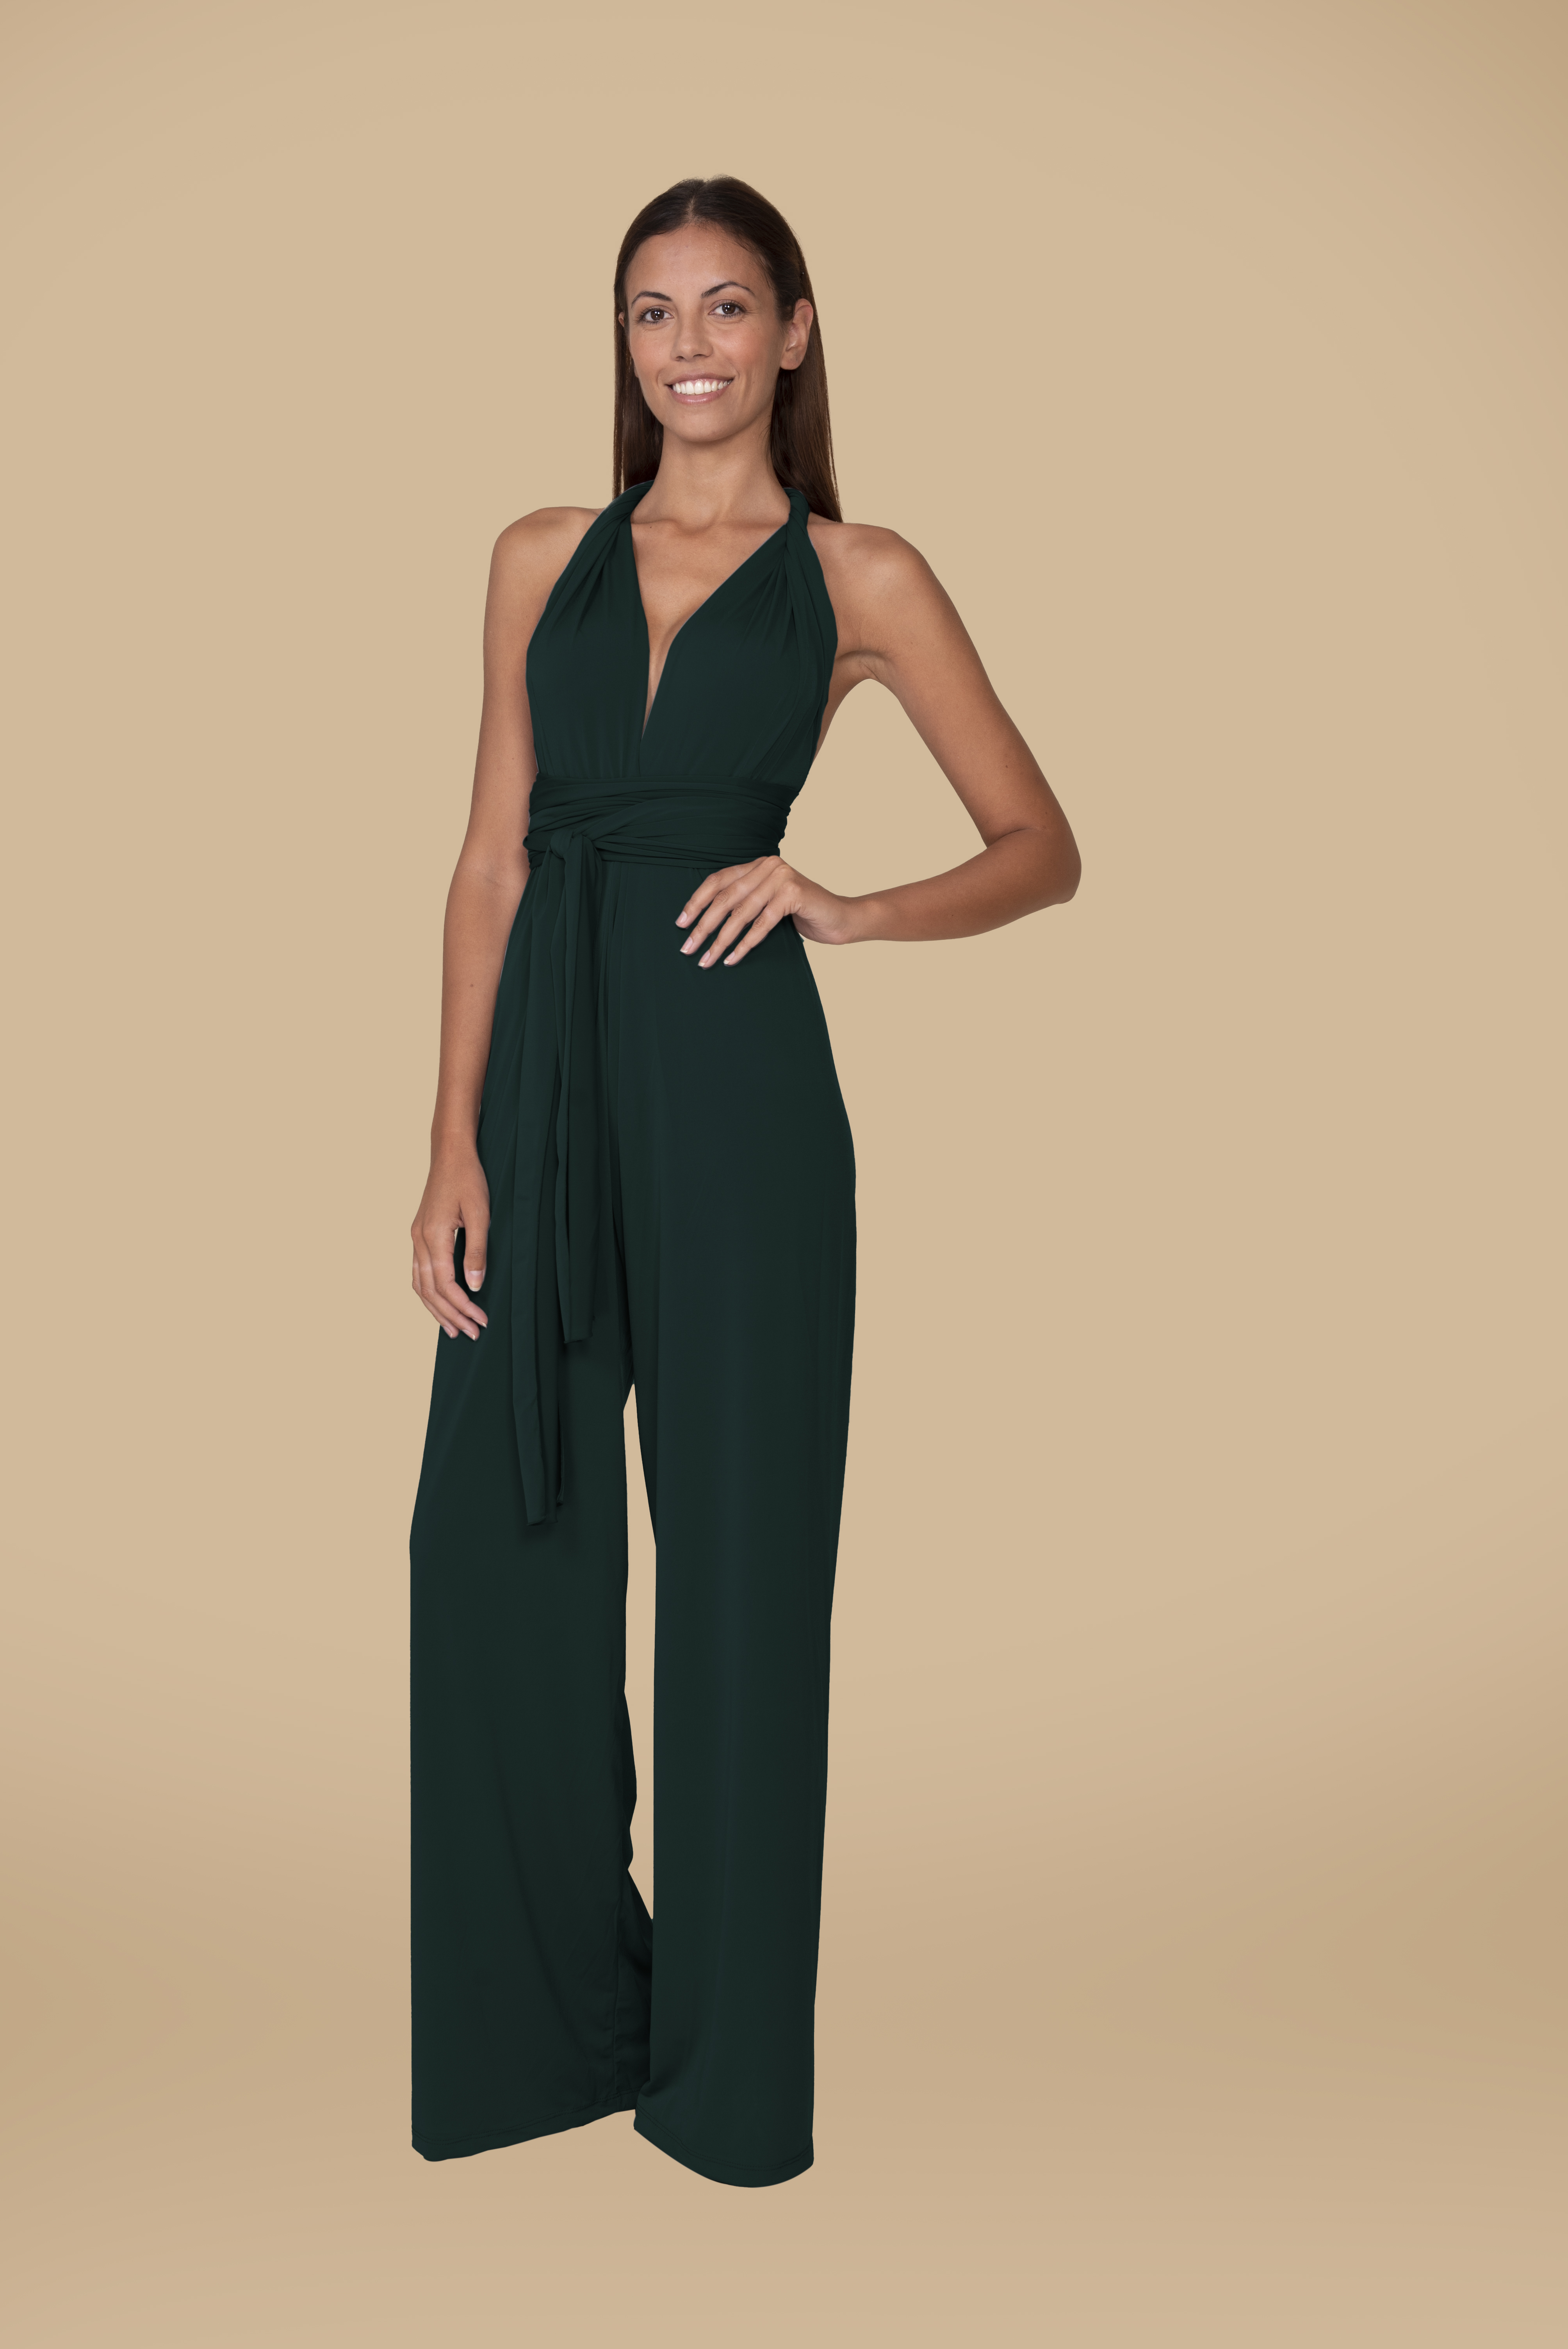 JUMPSUIT IN GREEN by Infinit Barcelona